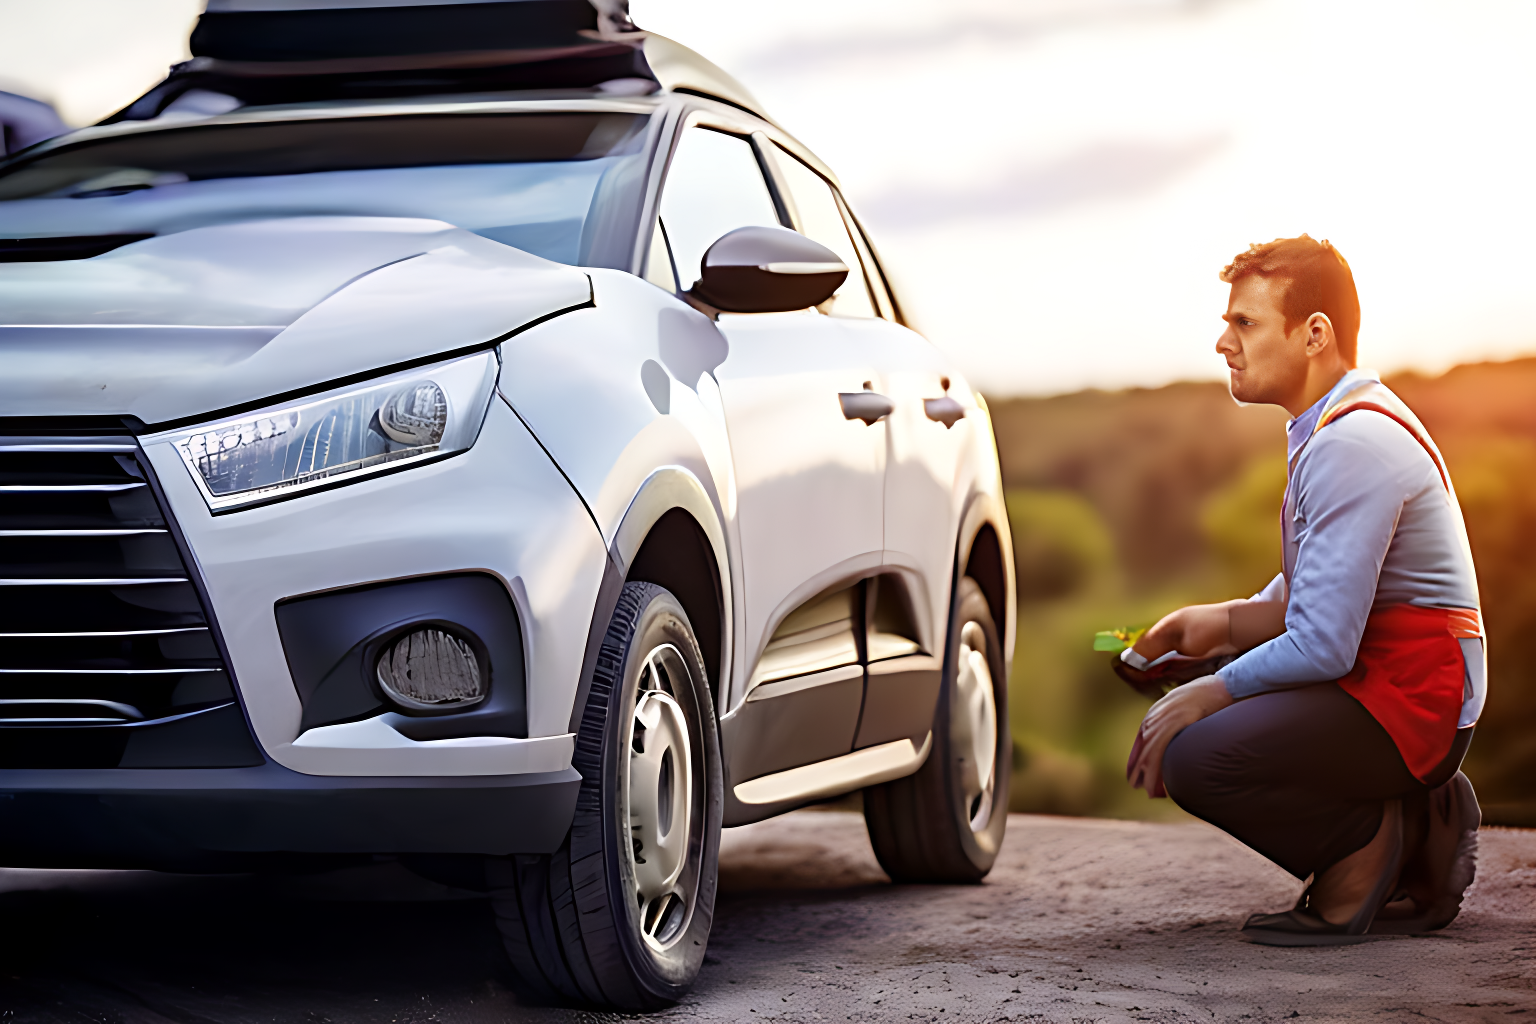 What Are the Common Signs That My Citroen Needs Professional Servicing?